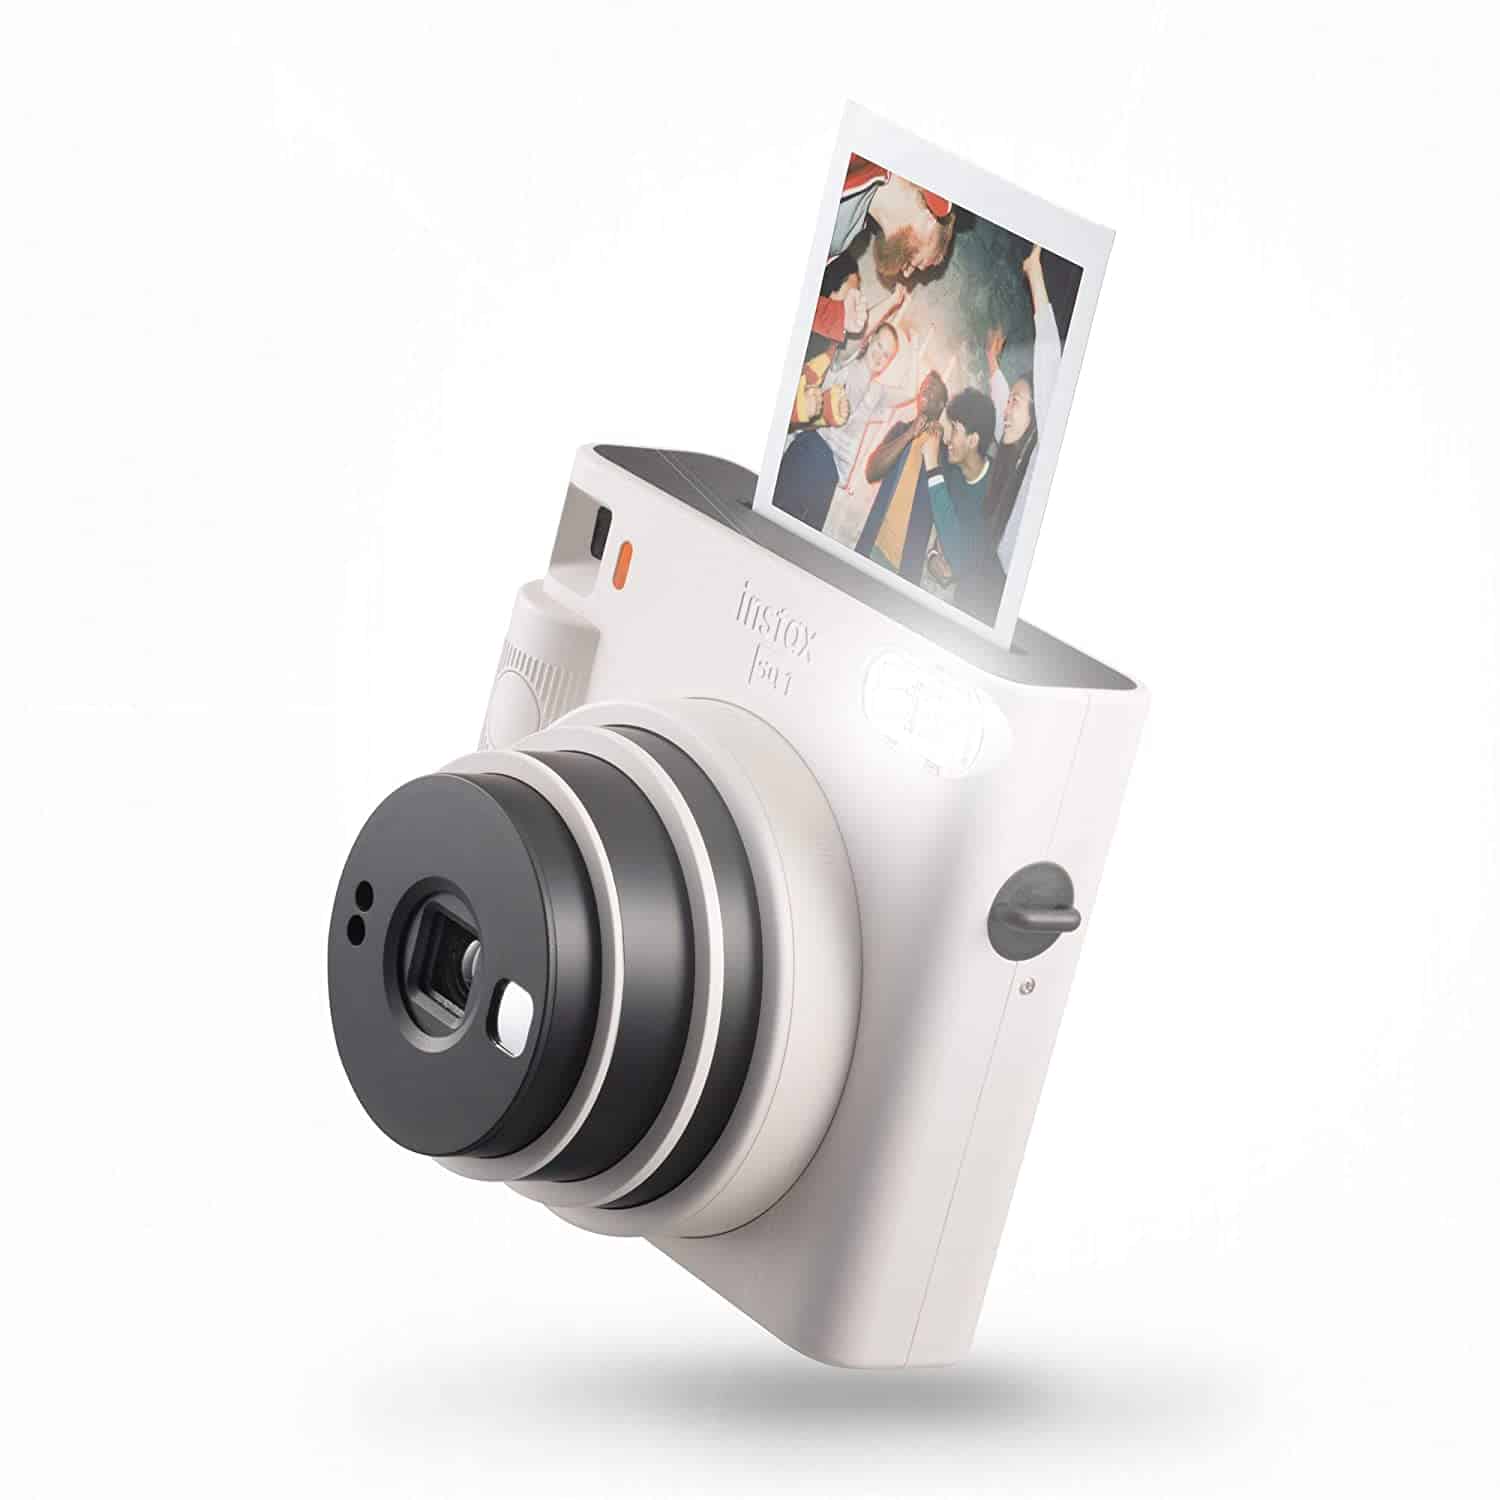 Fujifilm Instax Square SQ1 Review – Back to its Roots - Fortress of Solitude